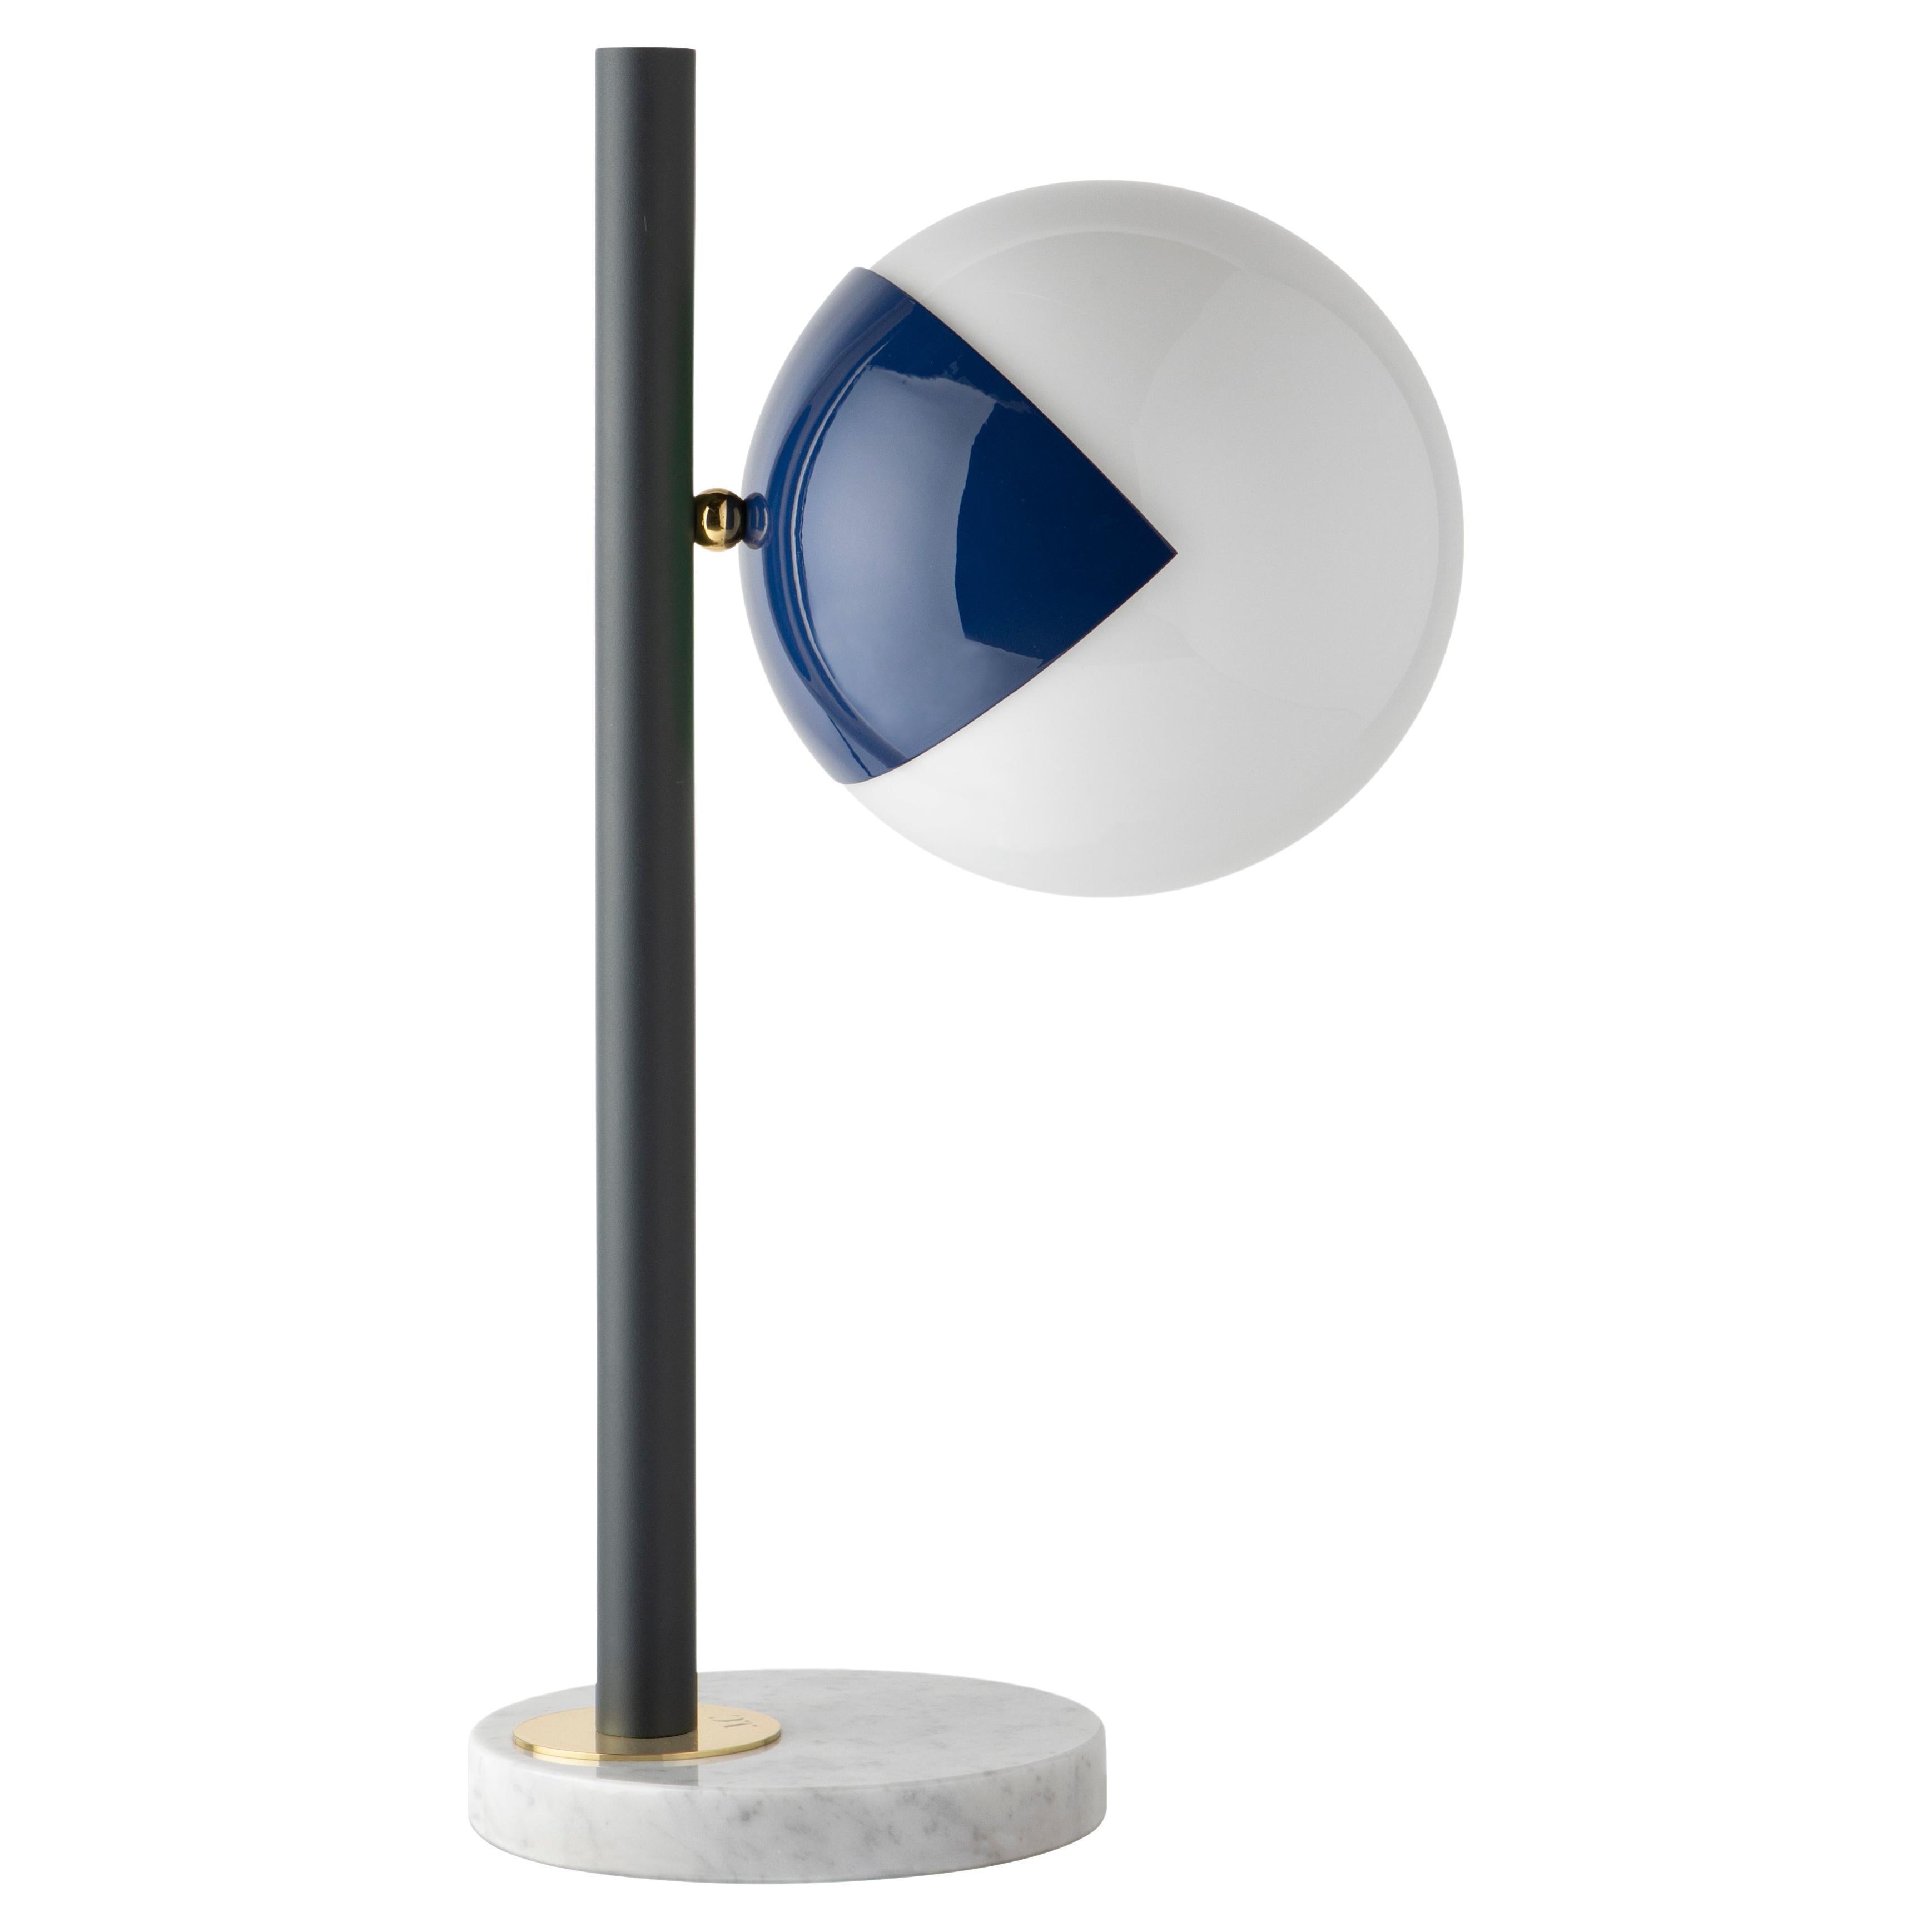 Green dimmable table lamp Pop-Up black by Magic Circus Editions
Dimensions: Ø 22 x 30 x 53 cm 
Materials: Carrara marble base, smooth brass tube, glossy mouth blown glass

All our lamps can be wired according to each country. If sold to the USA it